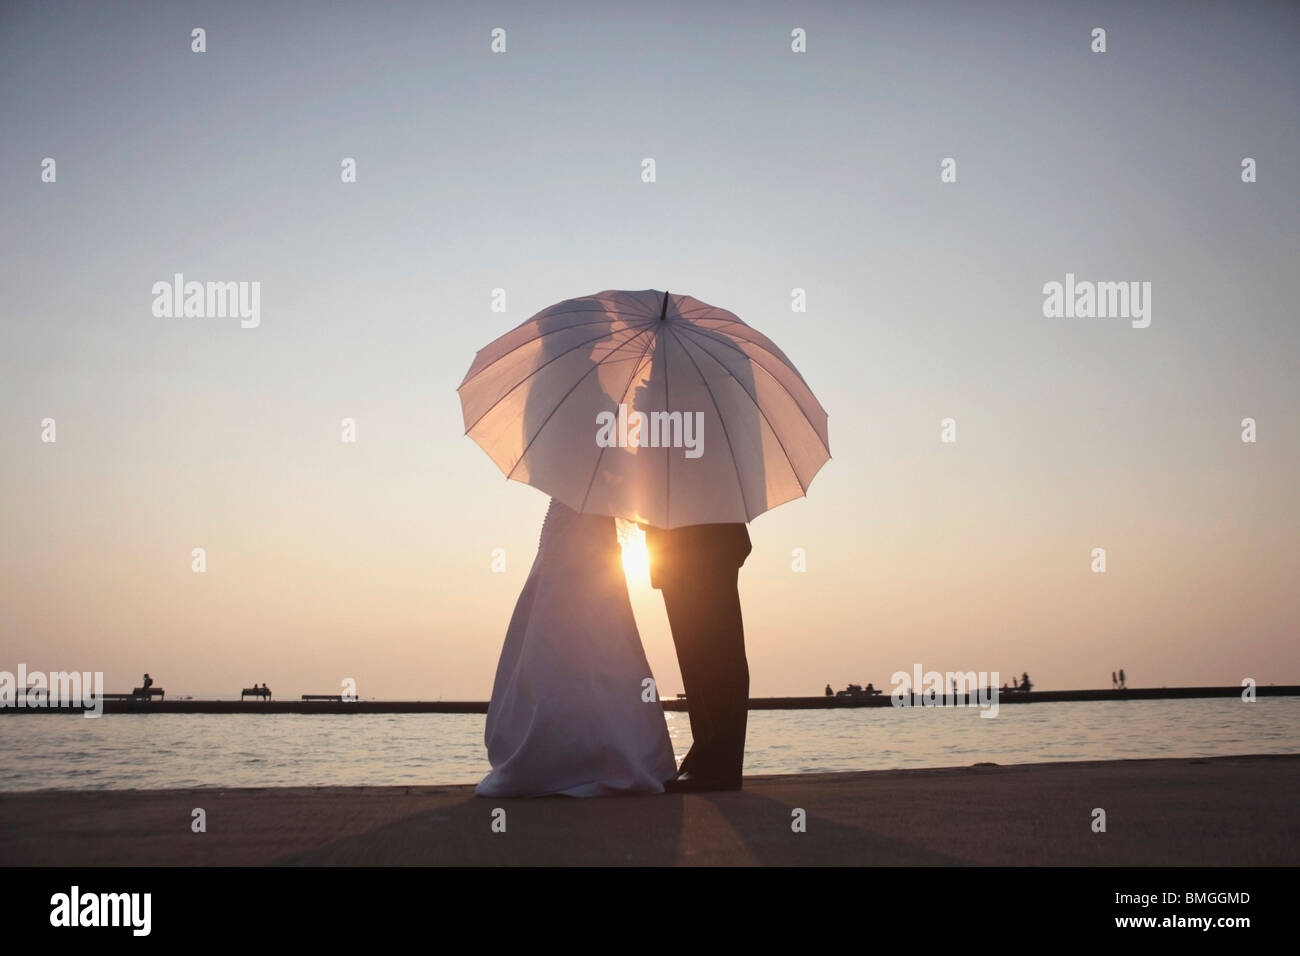 Silhouette Of A Bride And Groom Behind An Umbrella Stock Photo